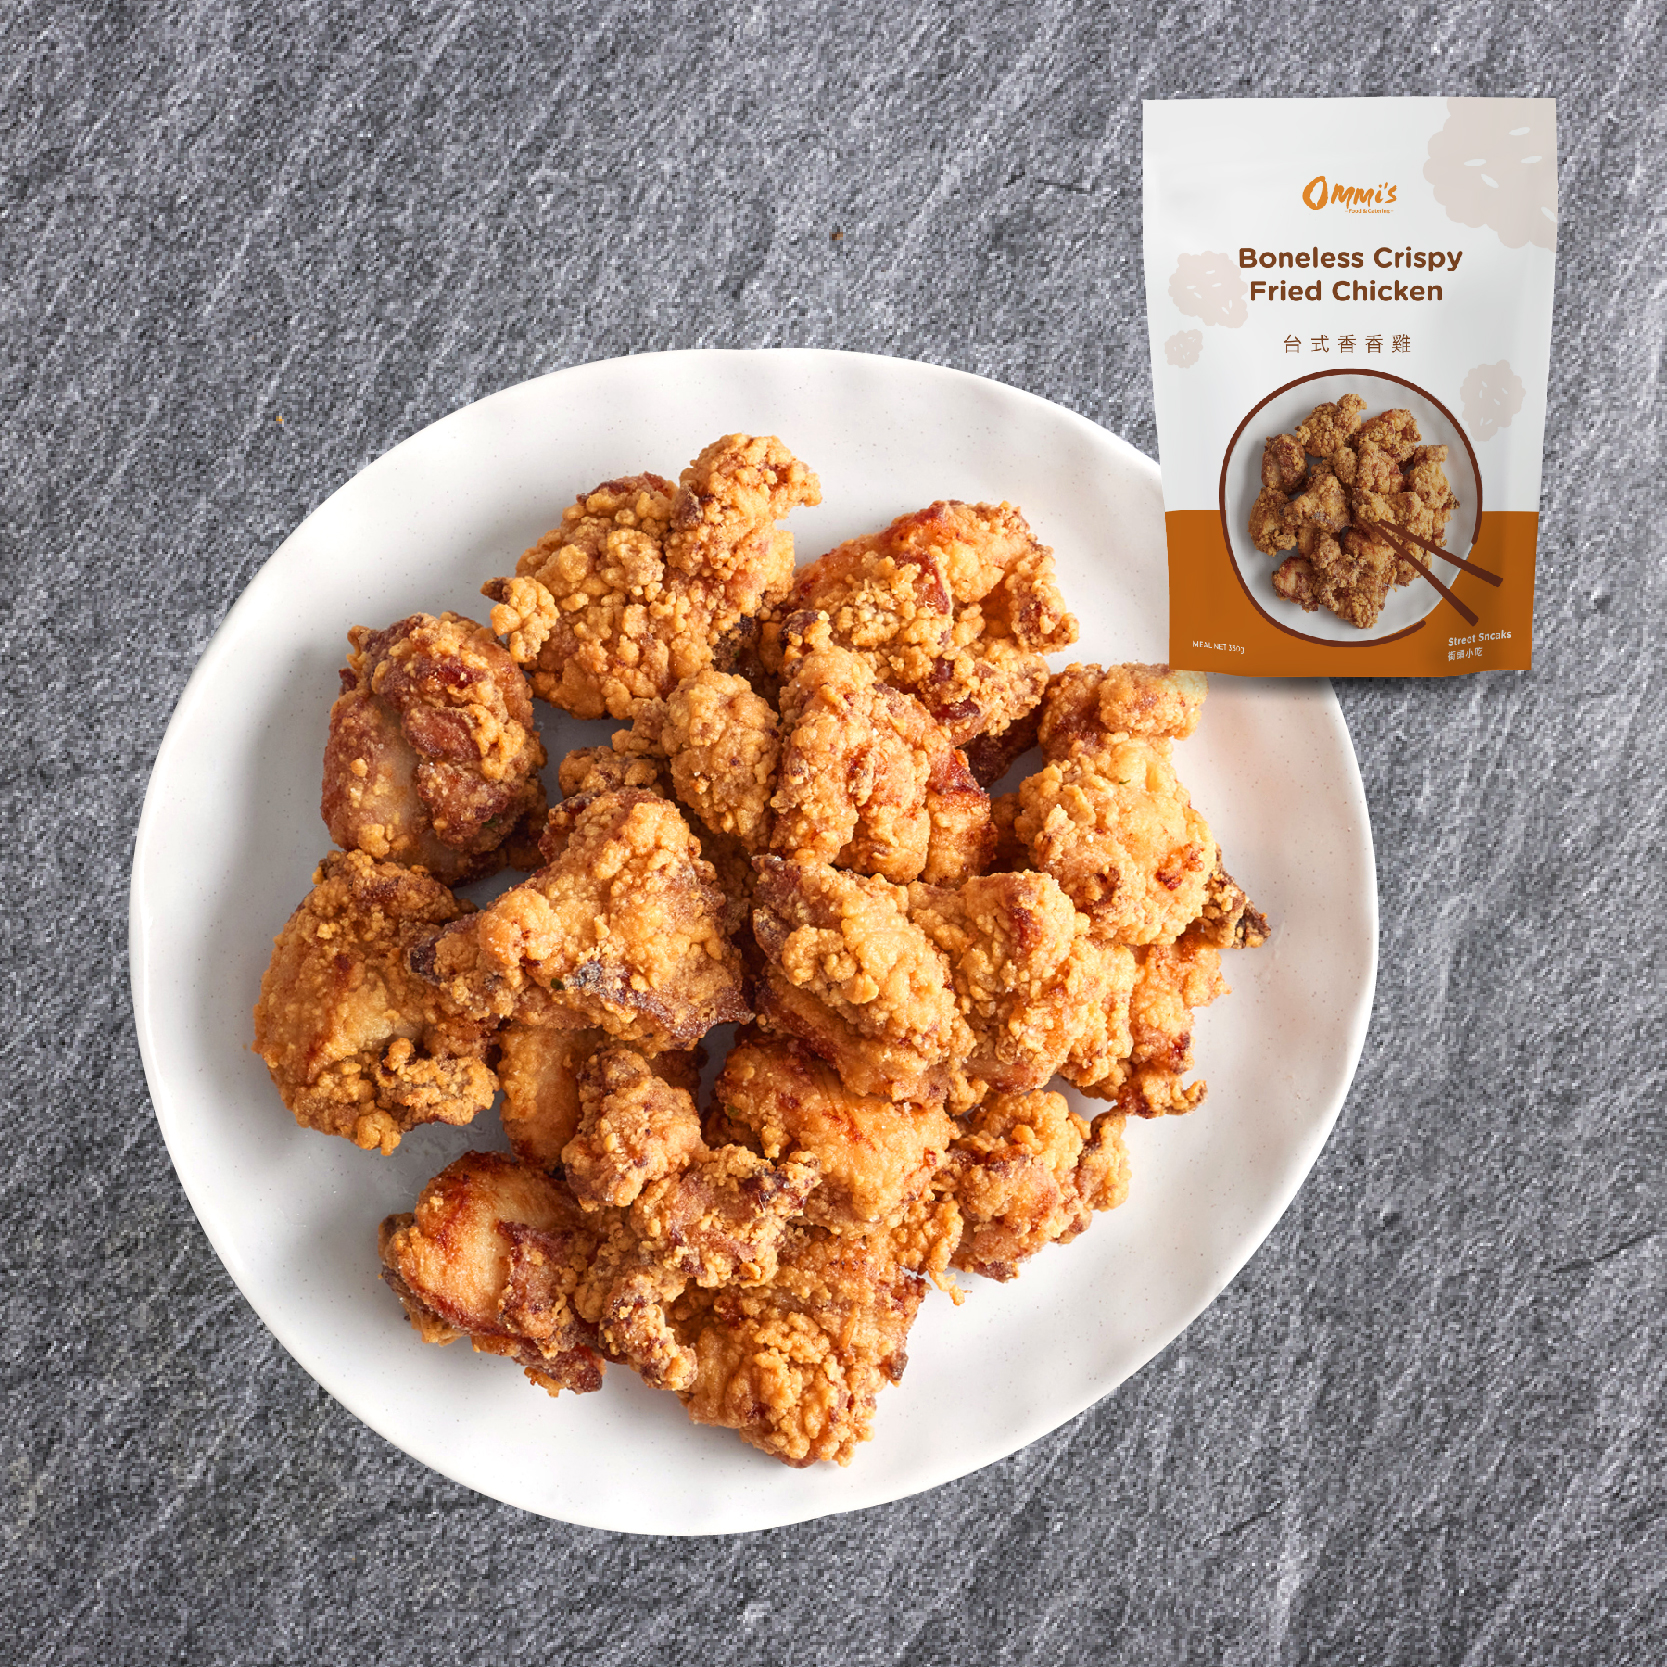 Ommi's food & Catering Boneless Taiwanese Crispy Fried Chicken 350g-eBest-Dishes & Set Meal,Ready Meal